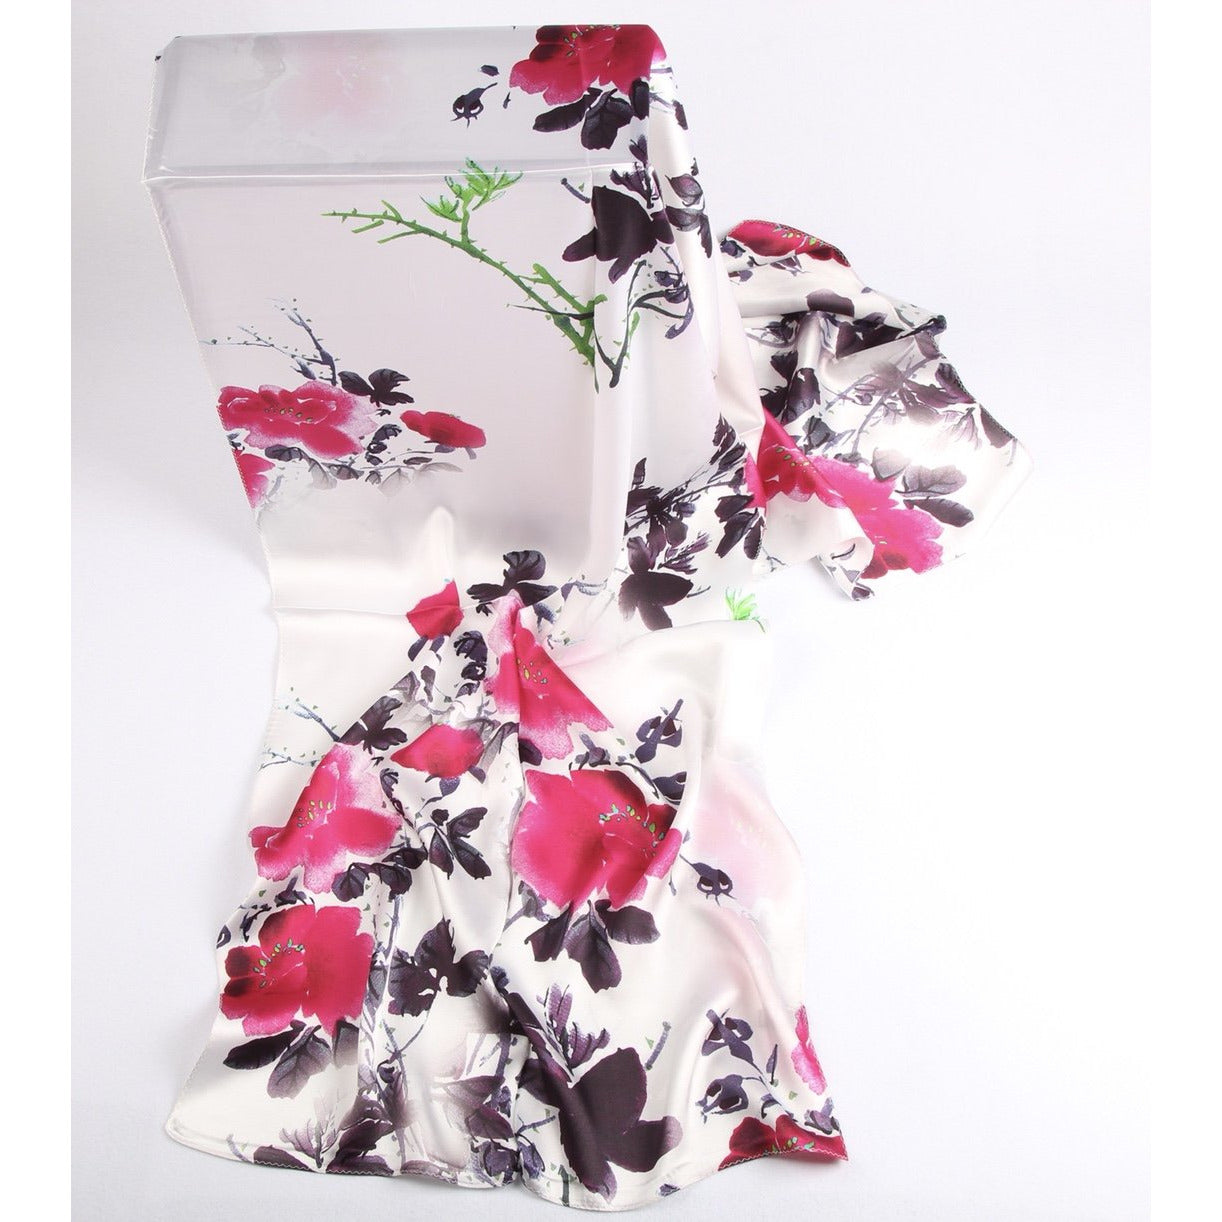 Vshine Silk and Shine Fashion Accessories|Silk Scarf Collecitons|Blossom Range|Water Paint|Red|Long Silk Scarf